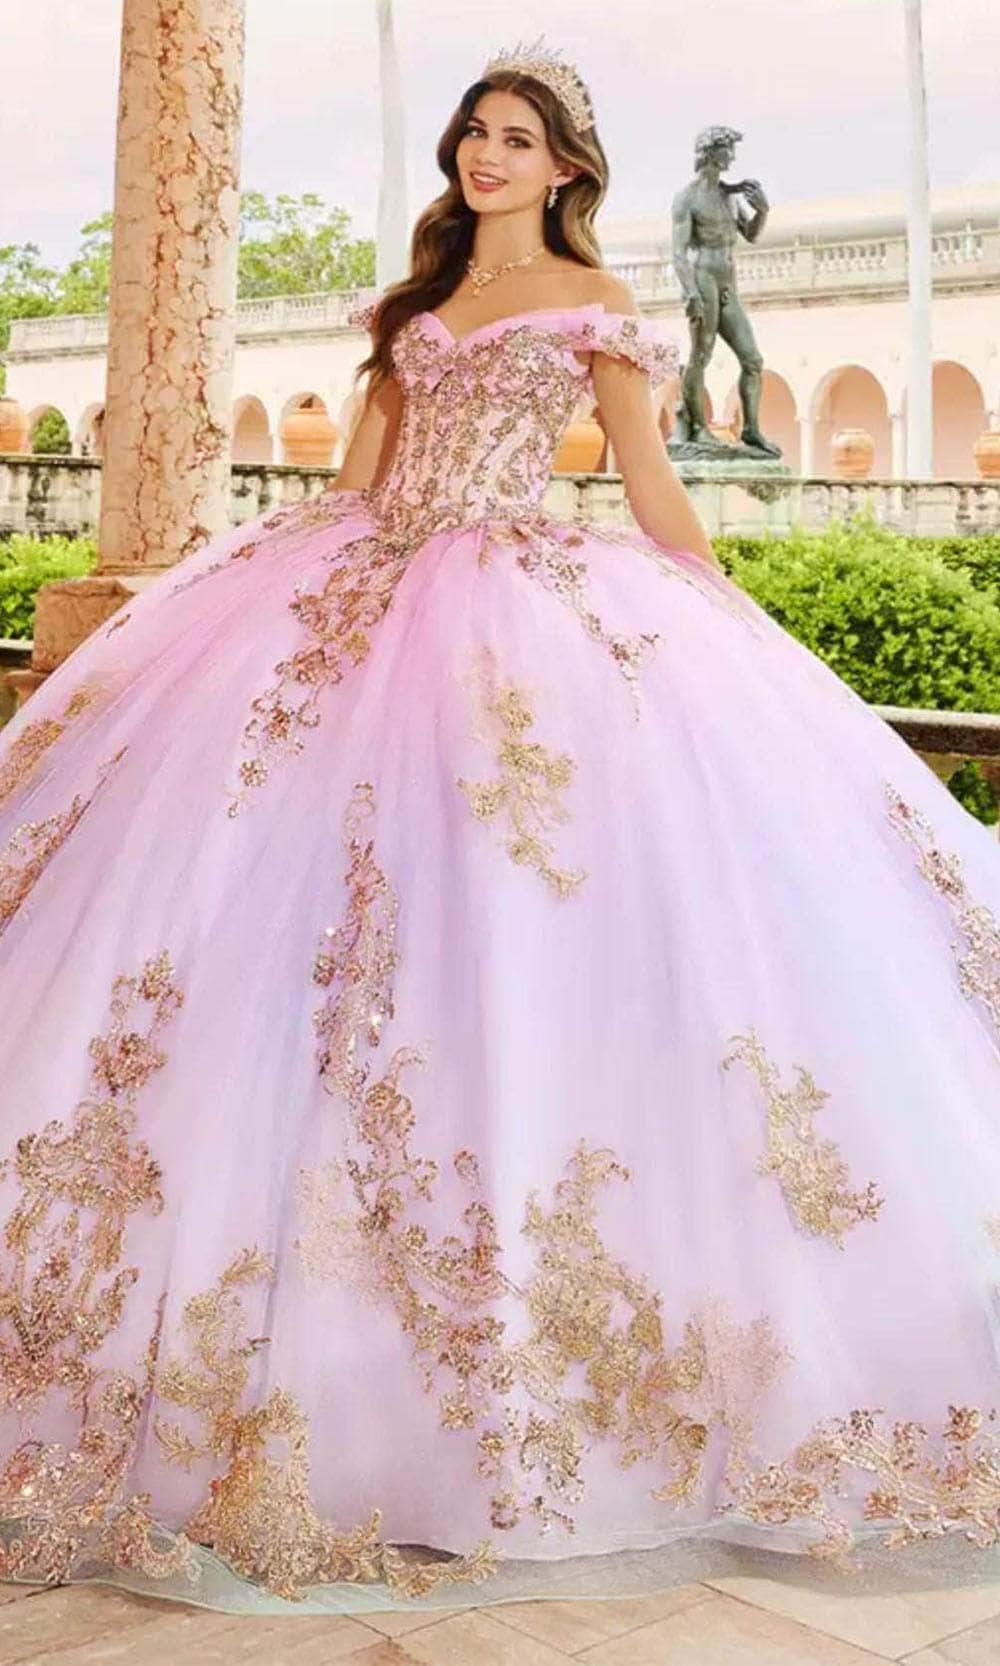 Princesa by Ariana Vara PR30152 - 3D Floral Lace-Up Tie Prom Gown
